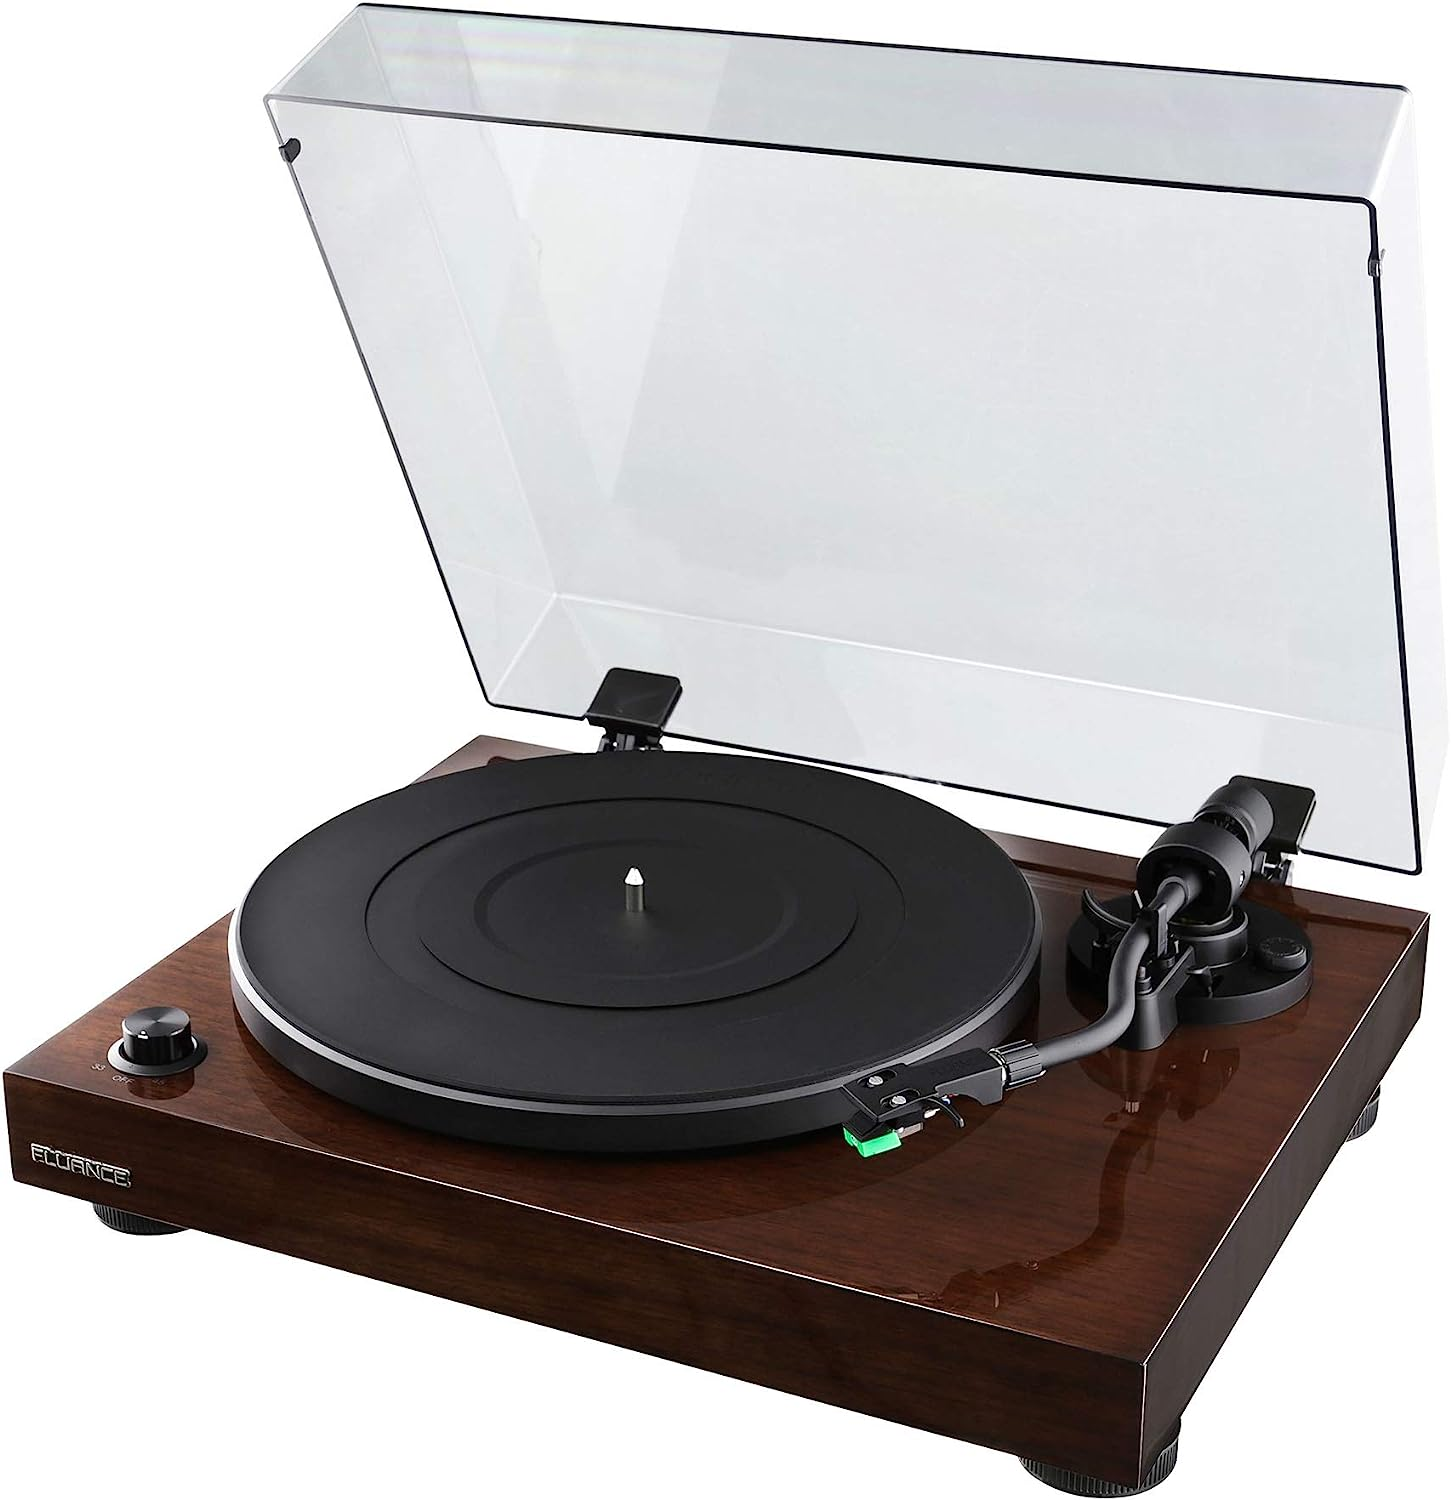 fluance record player, built in phono stage, belt drive